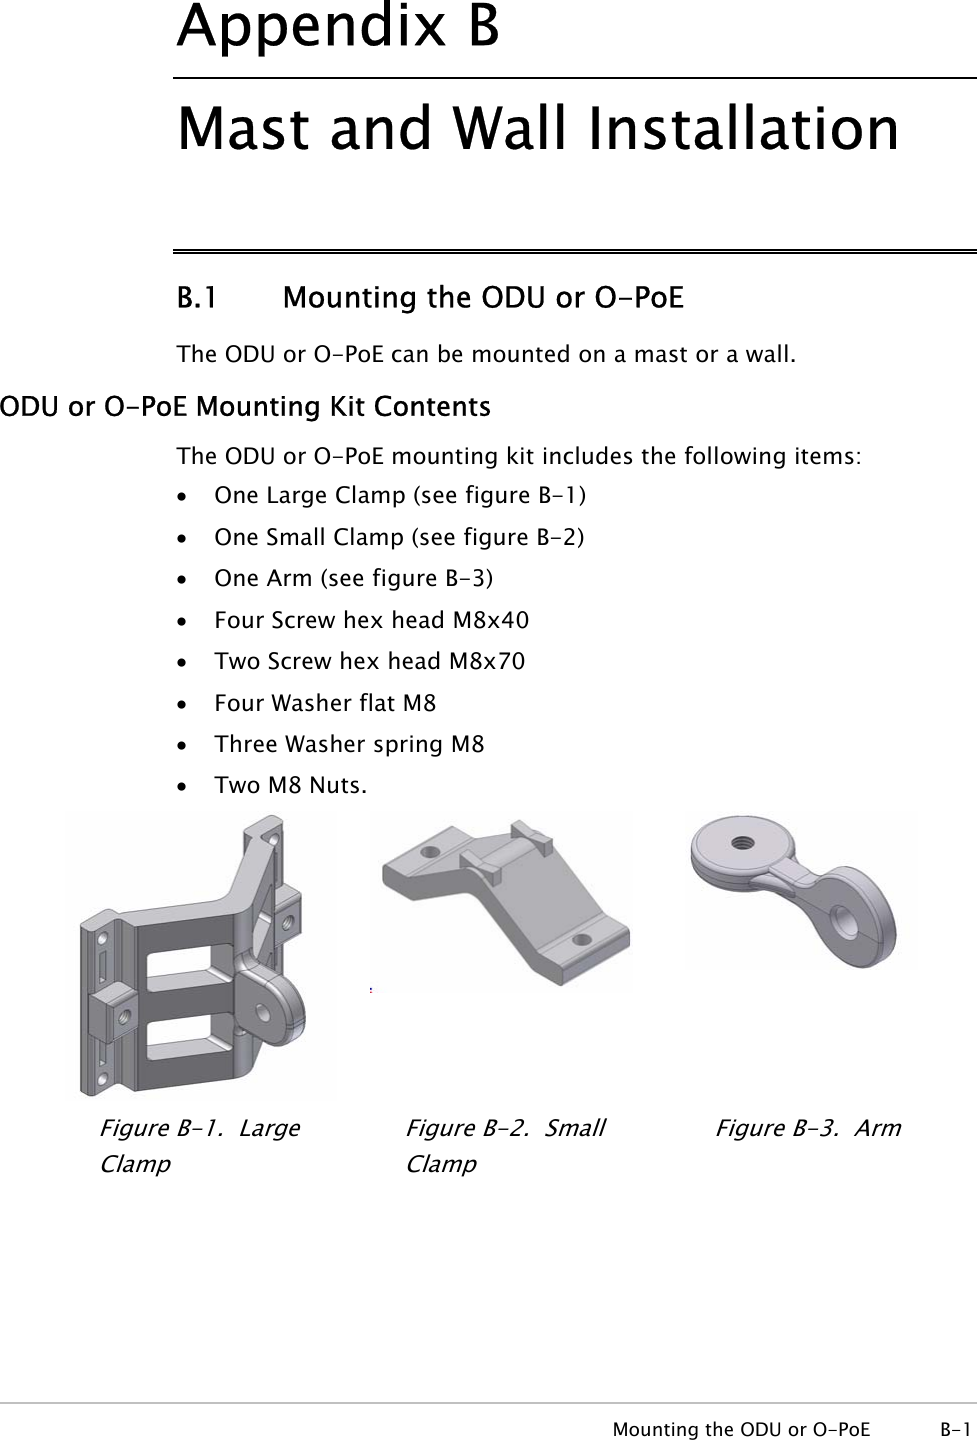 Appendix  B Mast and Wall Installation B.1   Mounting the ODU or O-PoE The ODU or O-PoE can be mounted on a mast or a wall. ODU or O-PoE Mounting Kit Contents The ODU or O-PoE mounting kit includes the following items: • One Large Clamp (see figure B-1) • One Small Clamp (see figure B-2) • One Arm (see figure B-3) • Four Screw hex head M8x40 • Two Screw hex head M8x70 • Four Washer flat M8 • Three Washer spring M8 • Two M8 Nuts.   Figure  B-1.  Large Clamp Figure  B-2.  Small Clamp Figure  B-3.  Arm  Mounting the ODU or O-PoE  B-1 